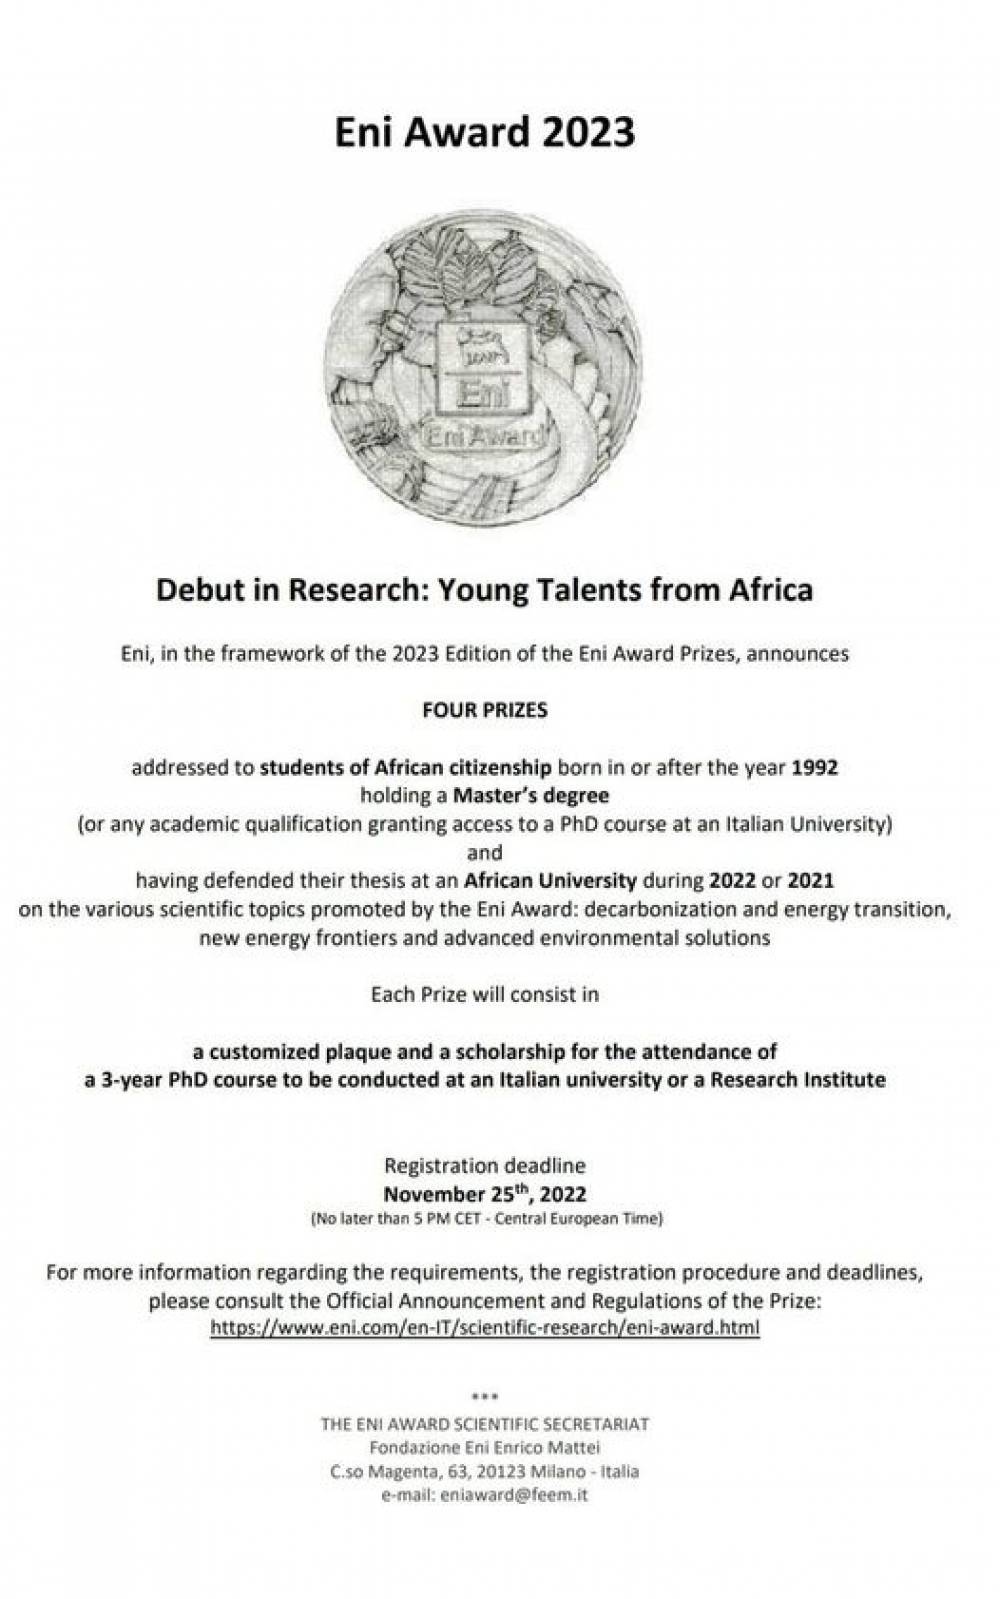 Eni Award Debut in Research Young Talents for Africa Prize